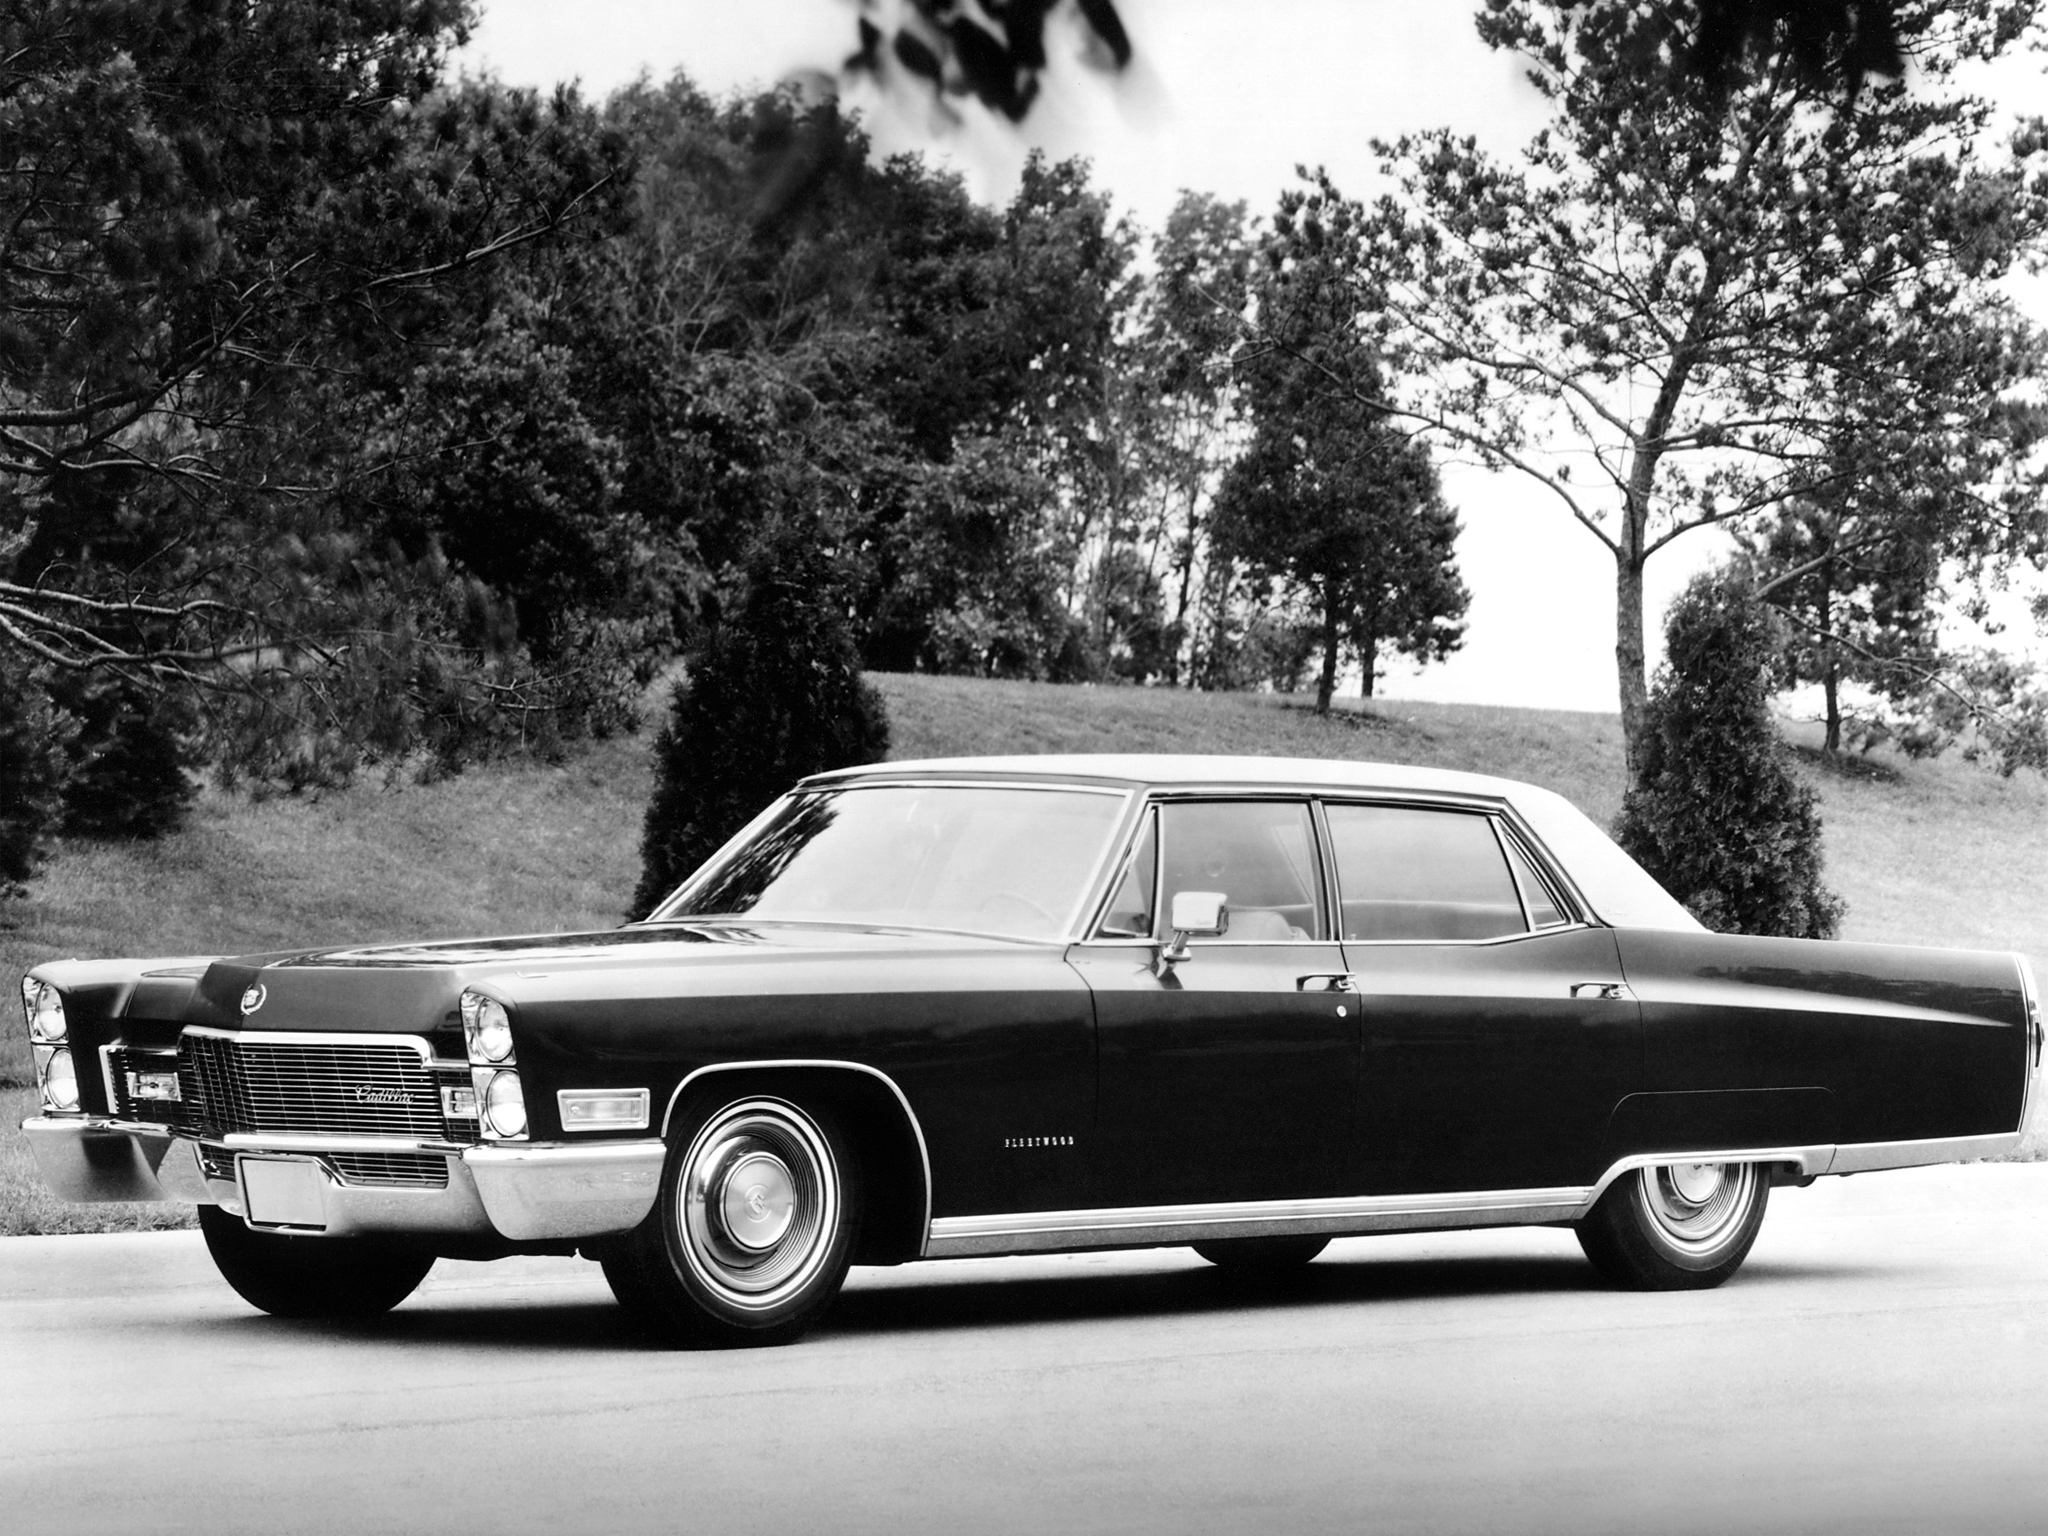 1968, Cadillac, Fleetwood, Sixty, Special, 68069 m, Luxury, Classic, Df Wallpaper